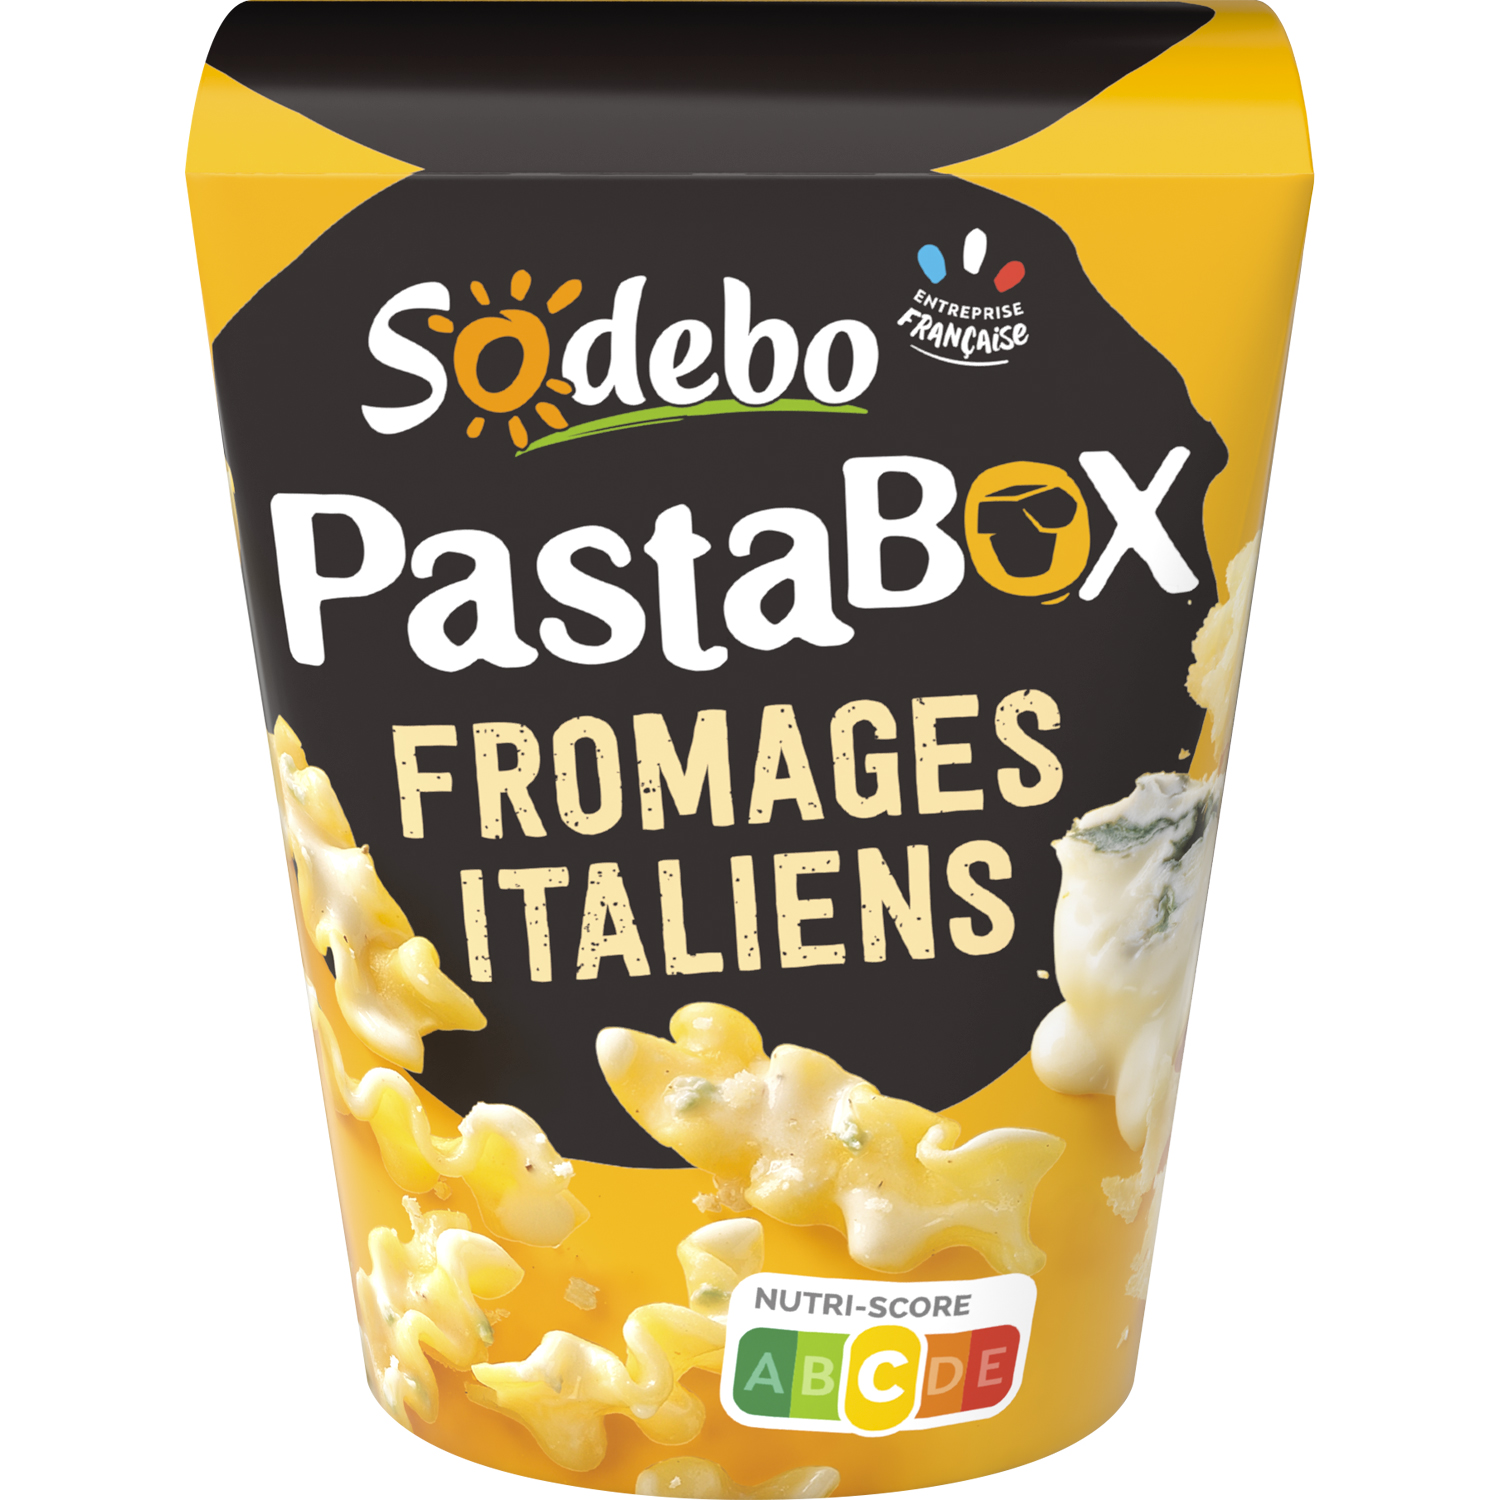 SODEBO Pasta box fusilli fromages italiens 1 portion 330g pas cher 